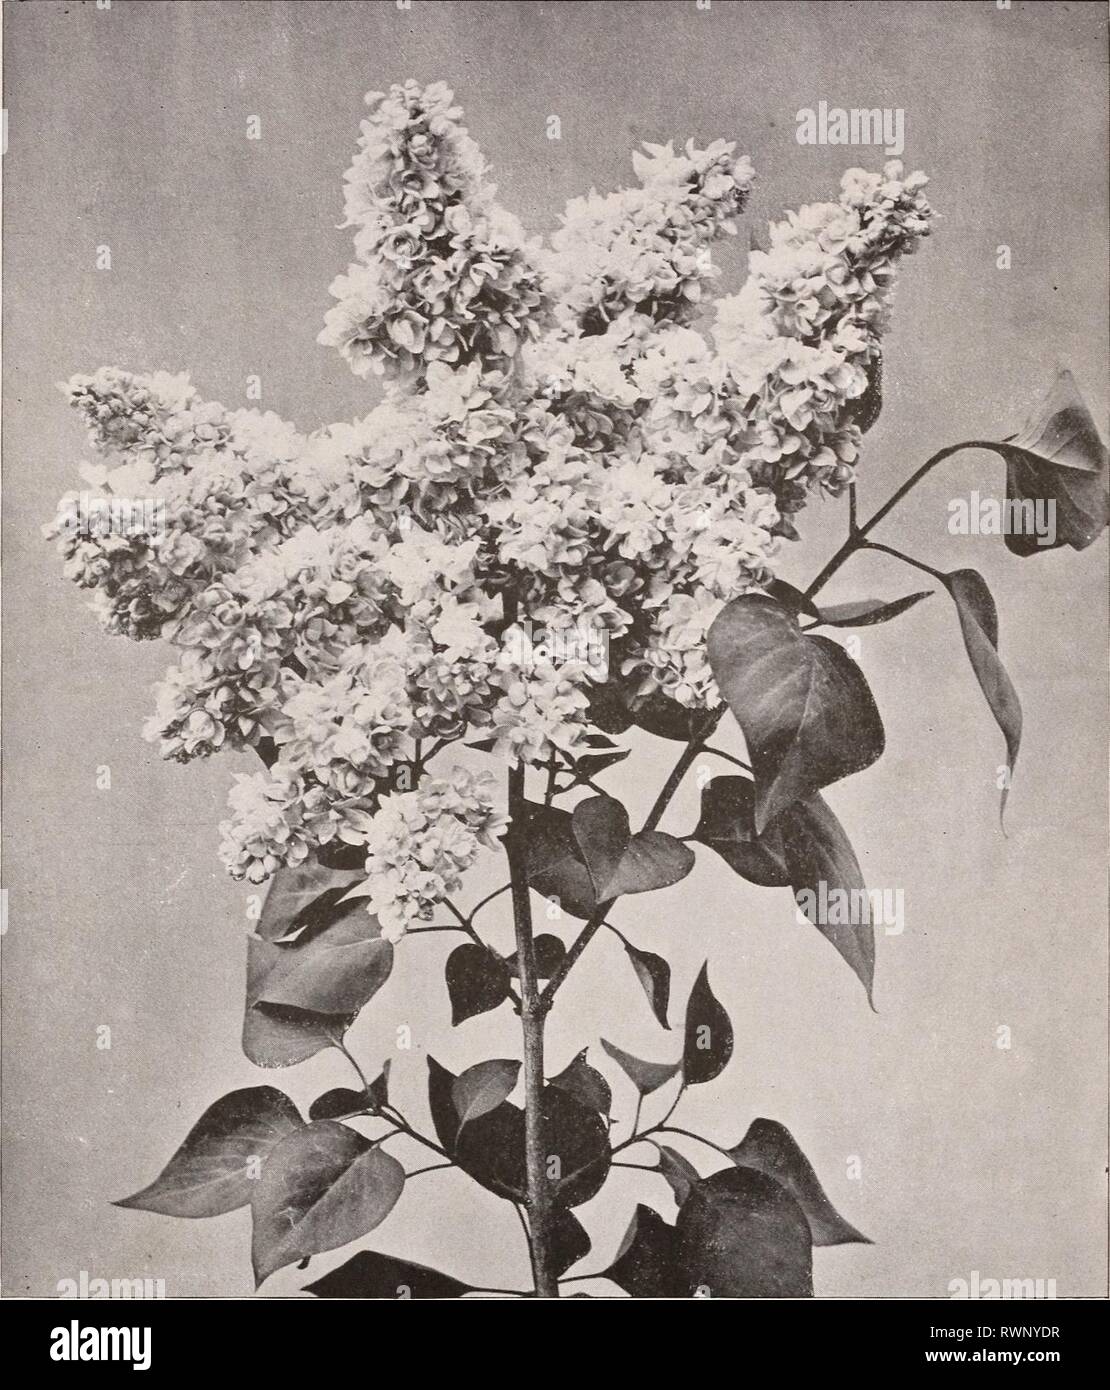 Ellwanger & Barry's supplementary catalogue Ellwanger & Barry's supplementary catalogue novelties, etc. : 1895 ellwangerbarryss1895moun Year: 1895  ELLIVANGER & BARRY'S    NEW DOUBLE LILAC. Clematis—Madame Edward Andre. A grand novelty. Flowers large, of a beautiful bright velvety red, very free-flowering, and continuous bloomer. $i.oo. Bignonia grandiflora. {Large-floivered Trumpet Creeper. A rare and beautiful variety of the Trumpet Creeper. Flowers very large, salmon color, center yellow, striped red ; fine. 75c. Single Herbaceous Pceonies. We have a fine collection embracing the choicest  Stock Photo